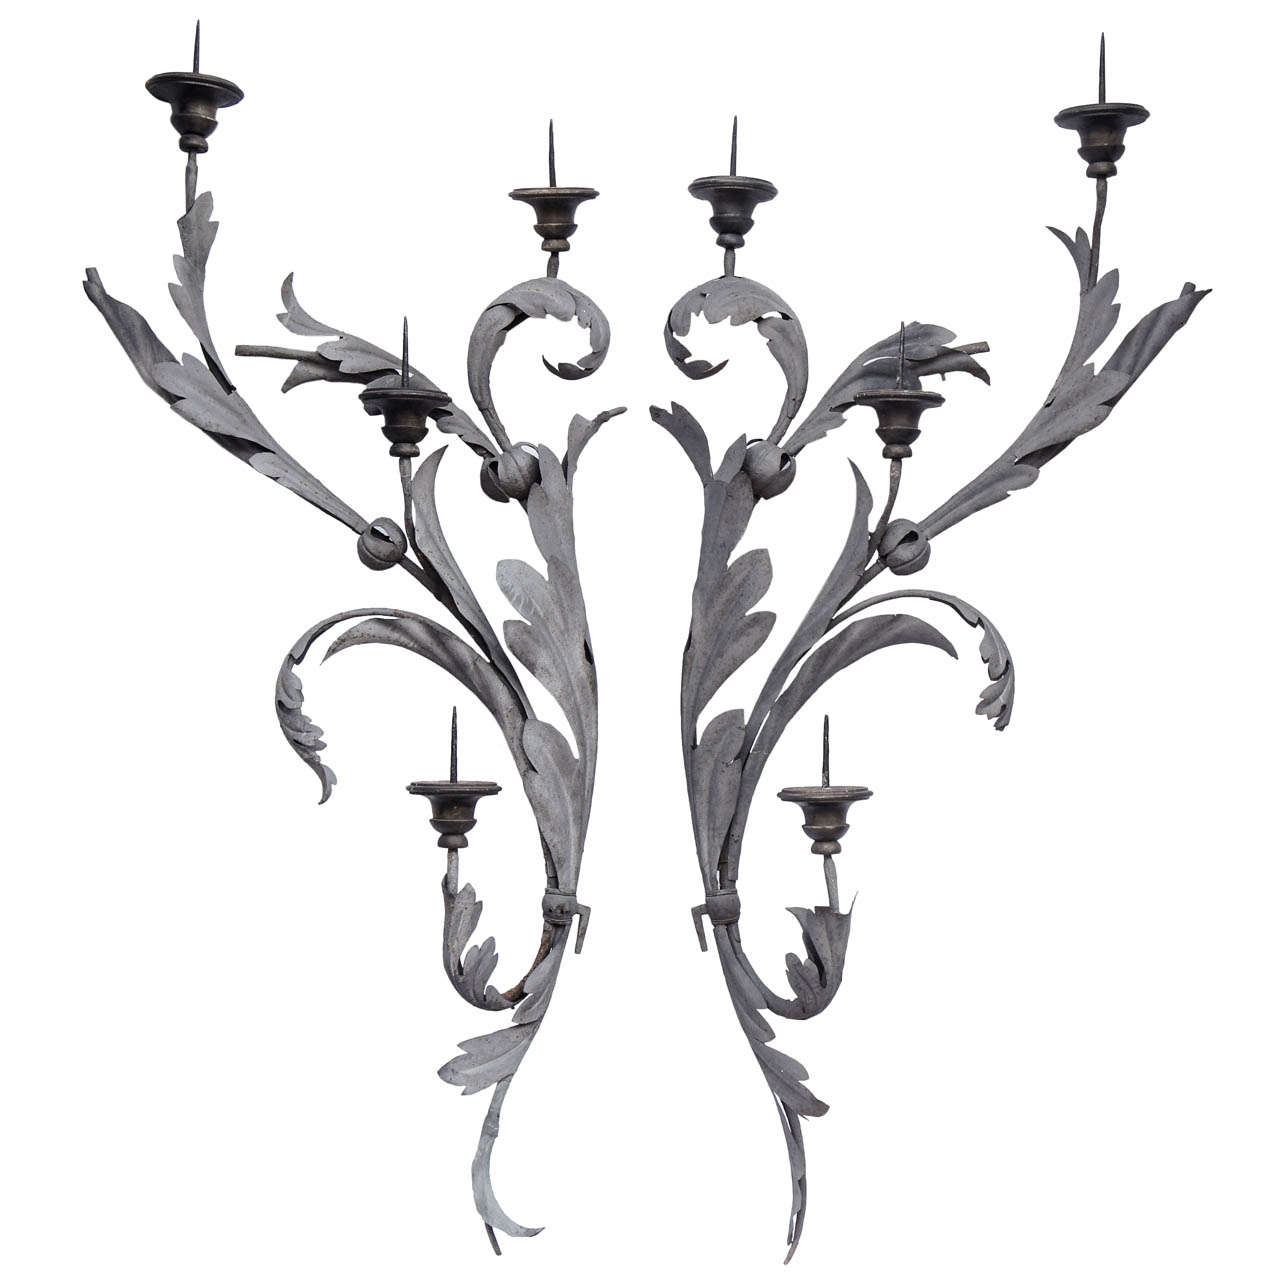 Pair Of Large 19th c Wrought Iron & Wood Baroque Pricket Four Light Sconces